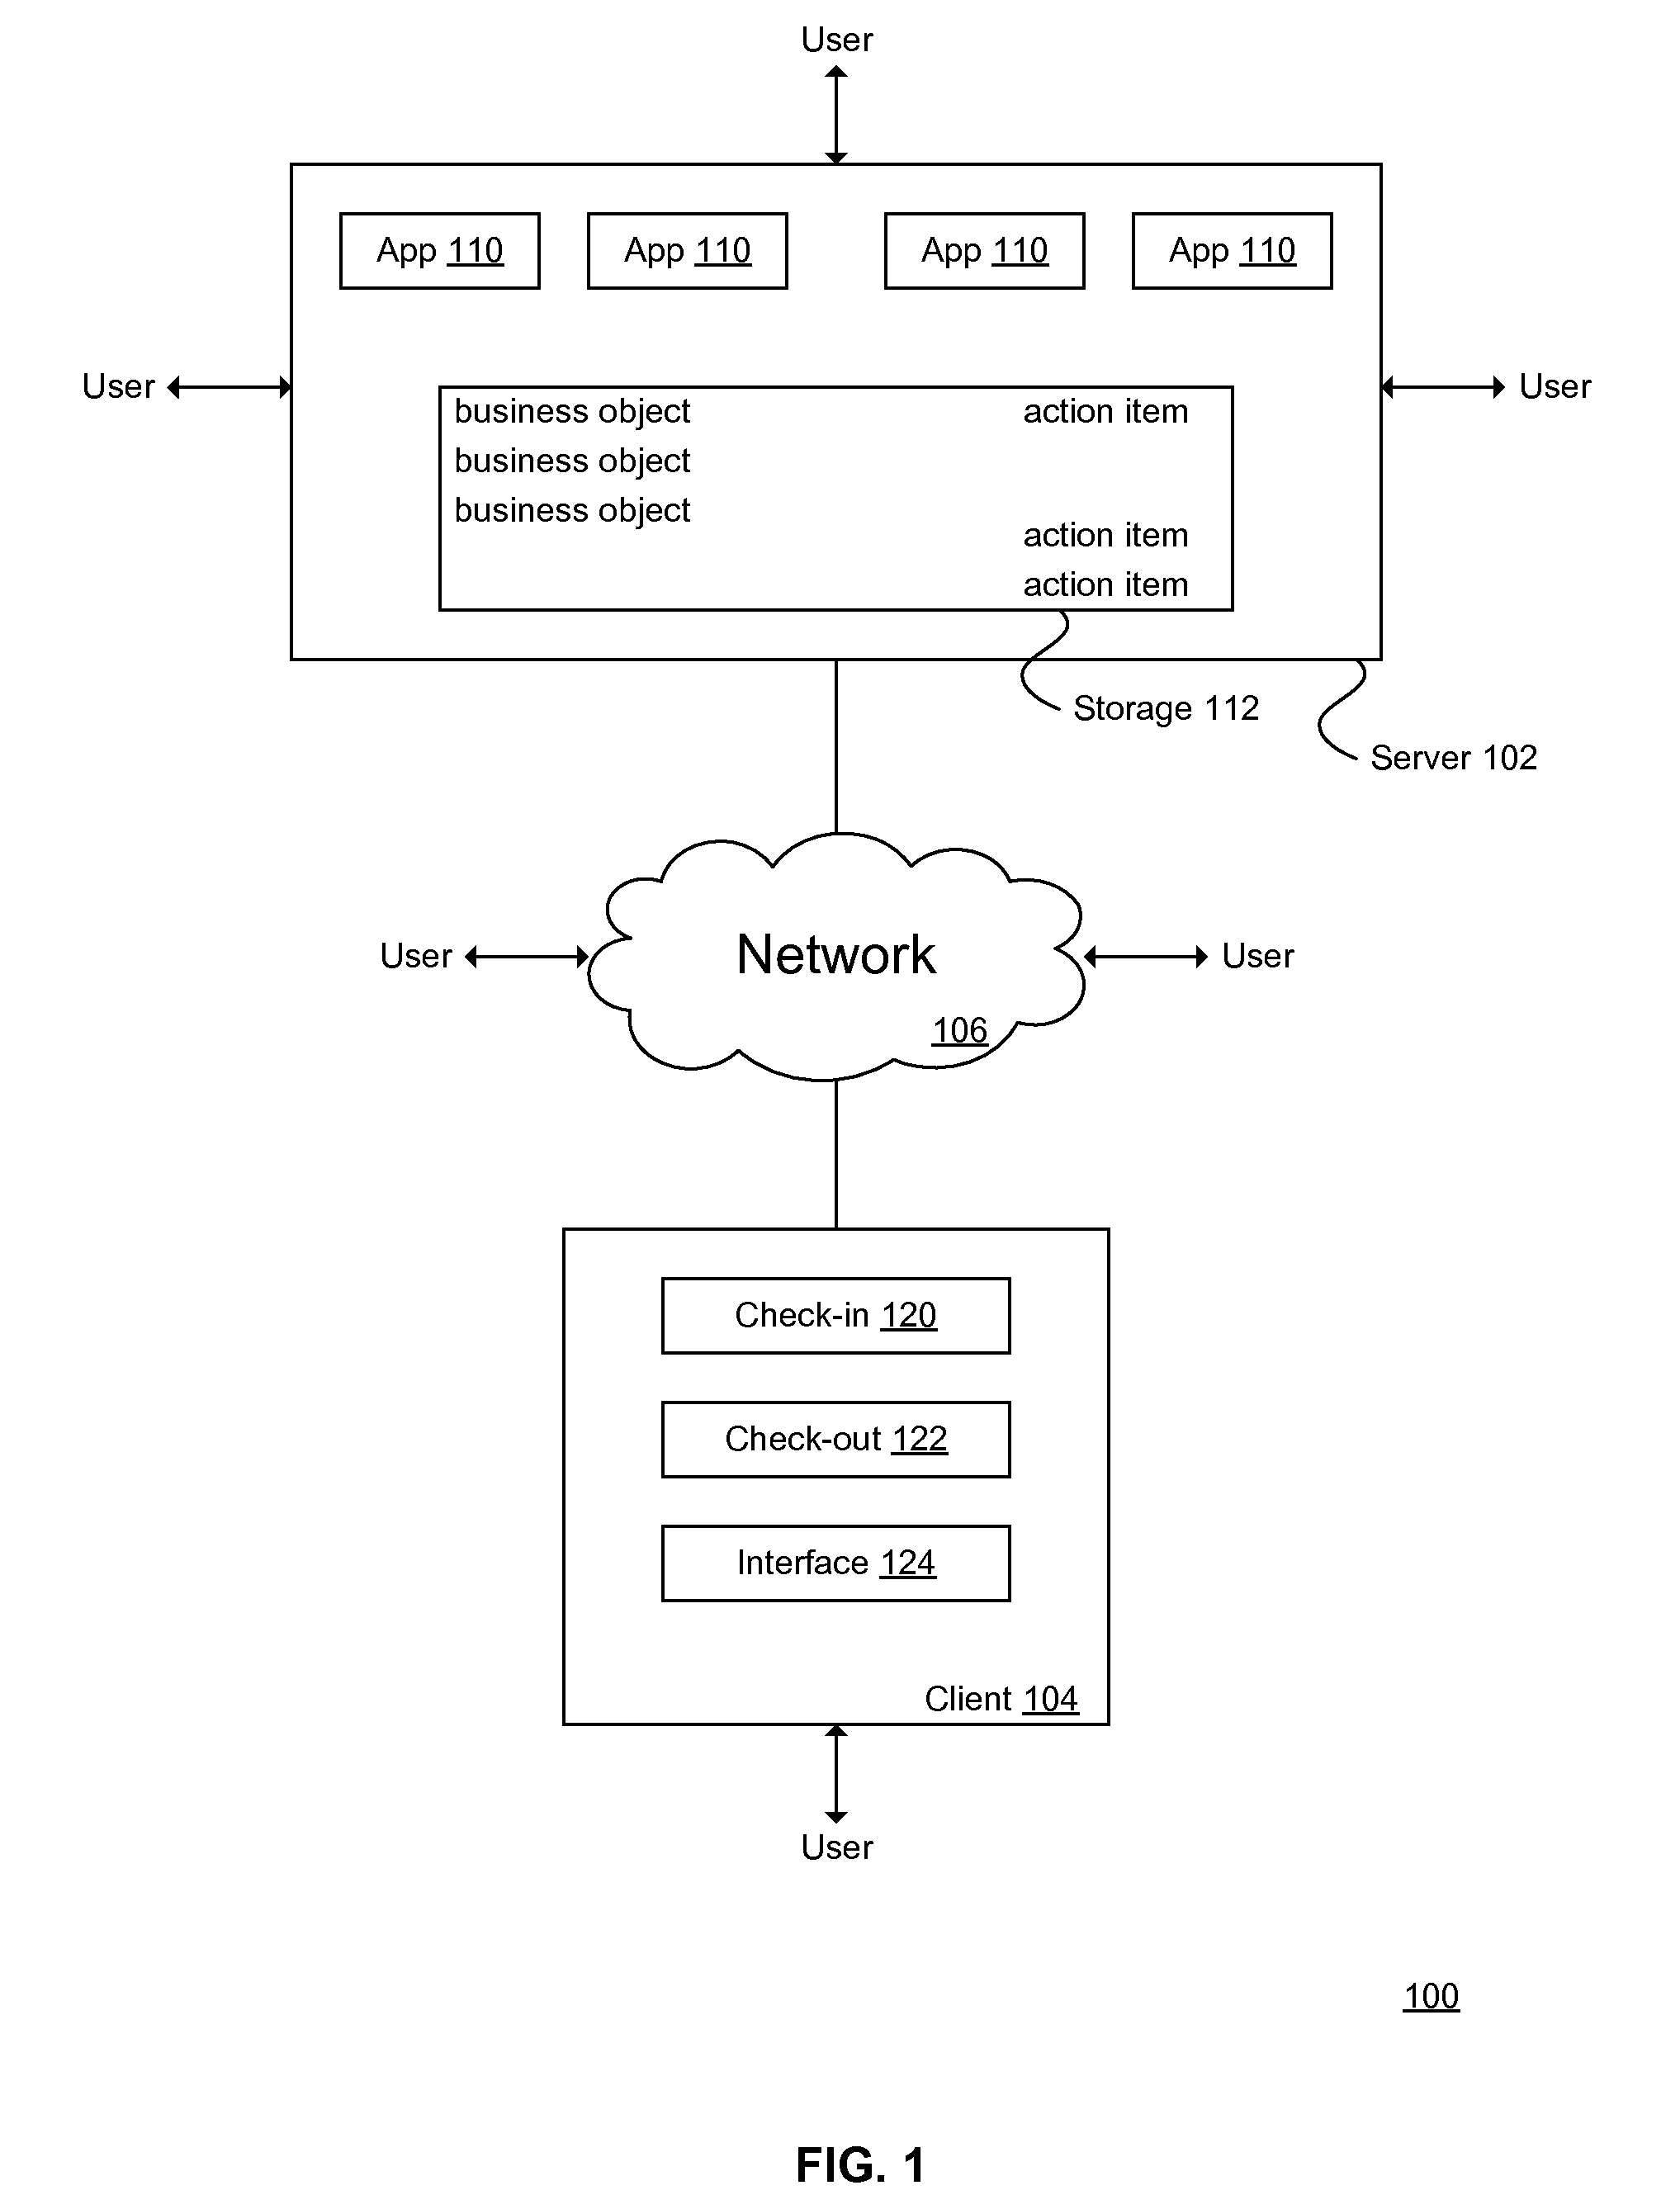 System and Method of Enterprise Action Item Planning, Executing, Tracking and Analytics